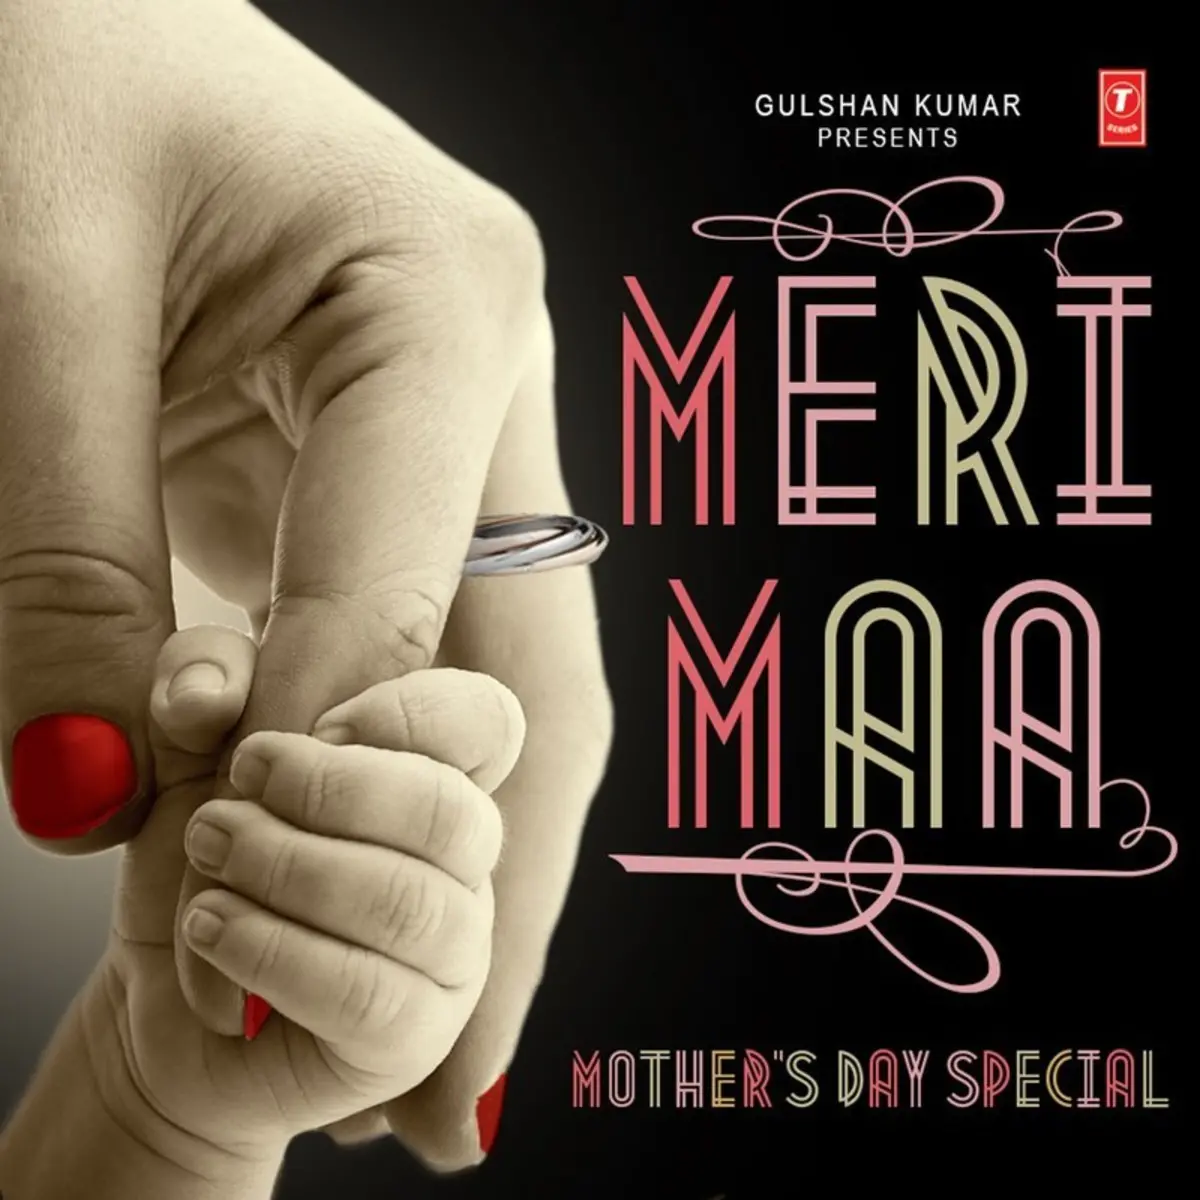 Meri Maa Mother S Day Special Songs Download Meri Maa Mother S Day Special Mp3 Songs Online Free On Gaana Com